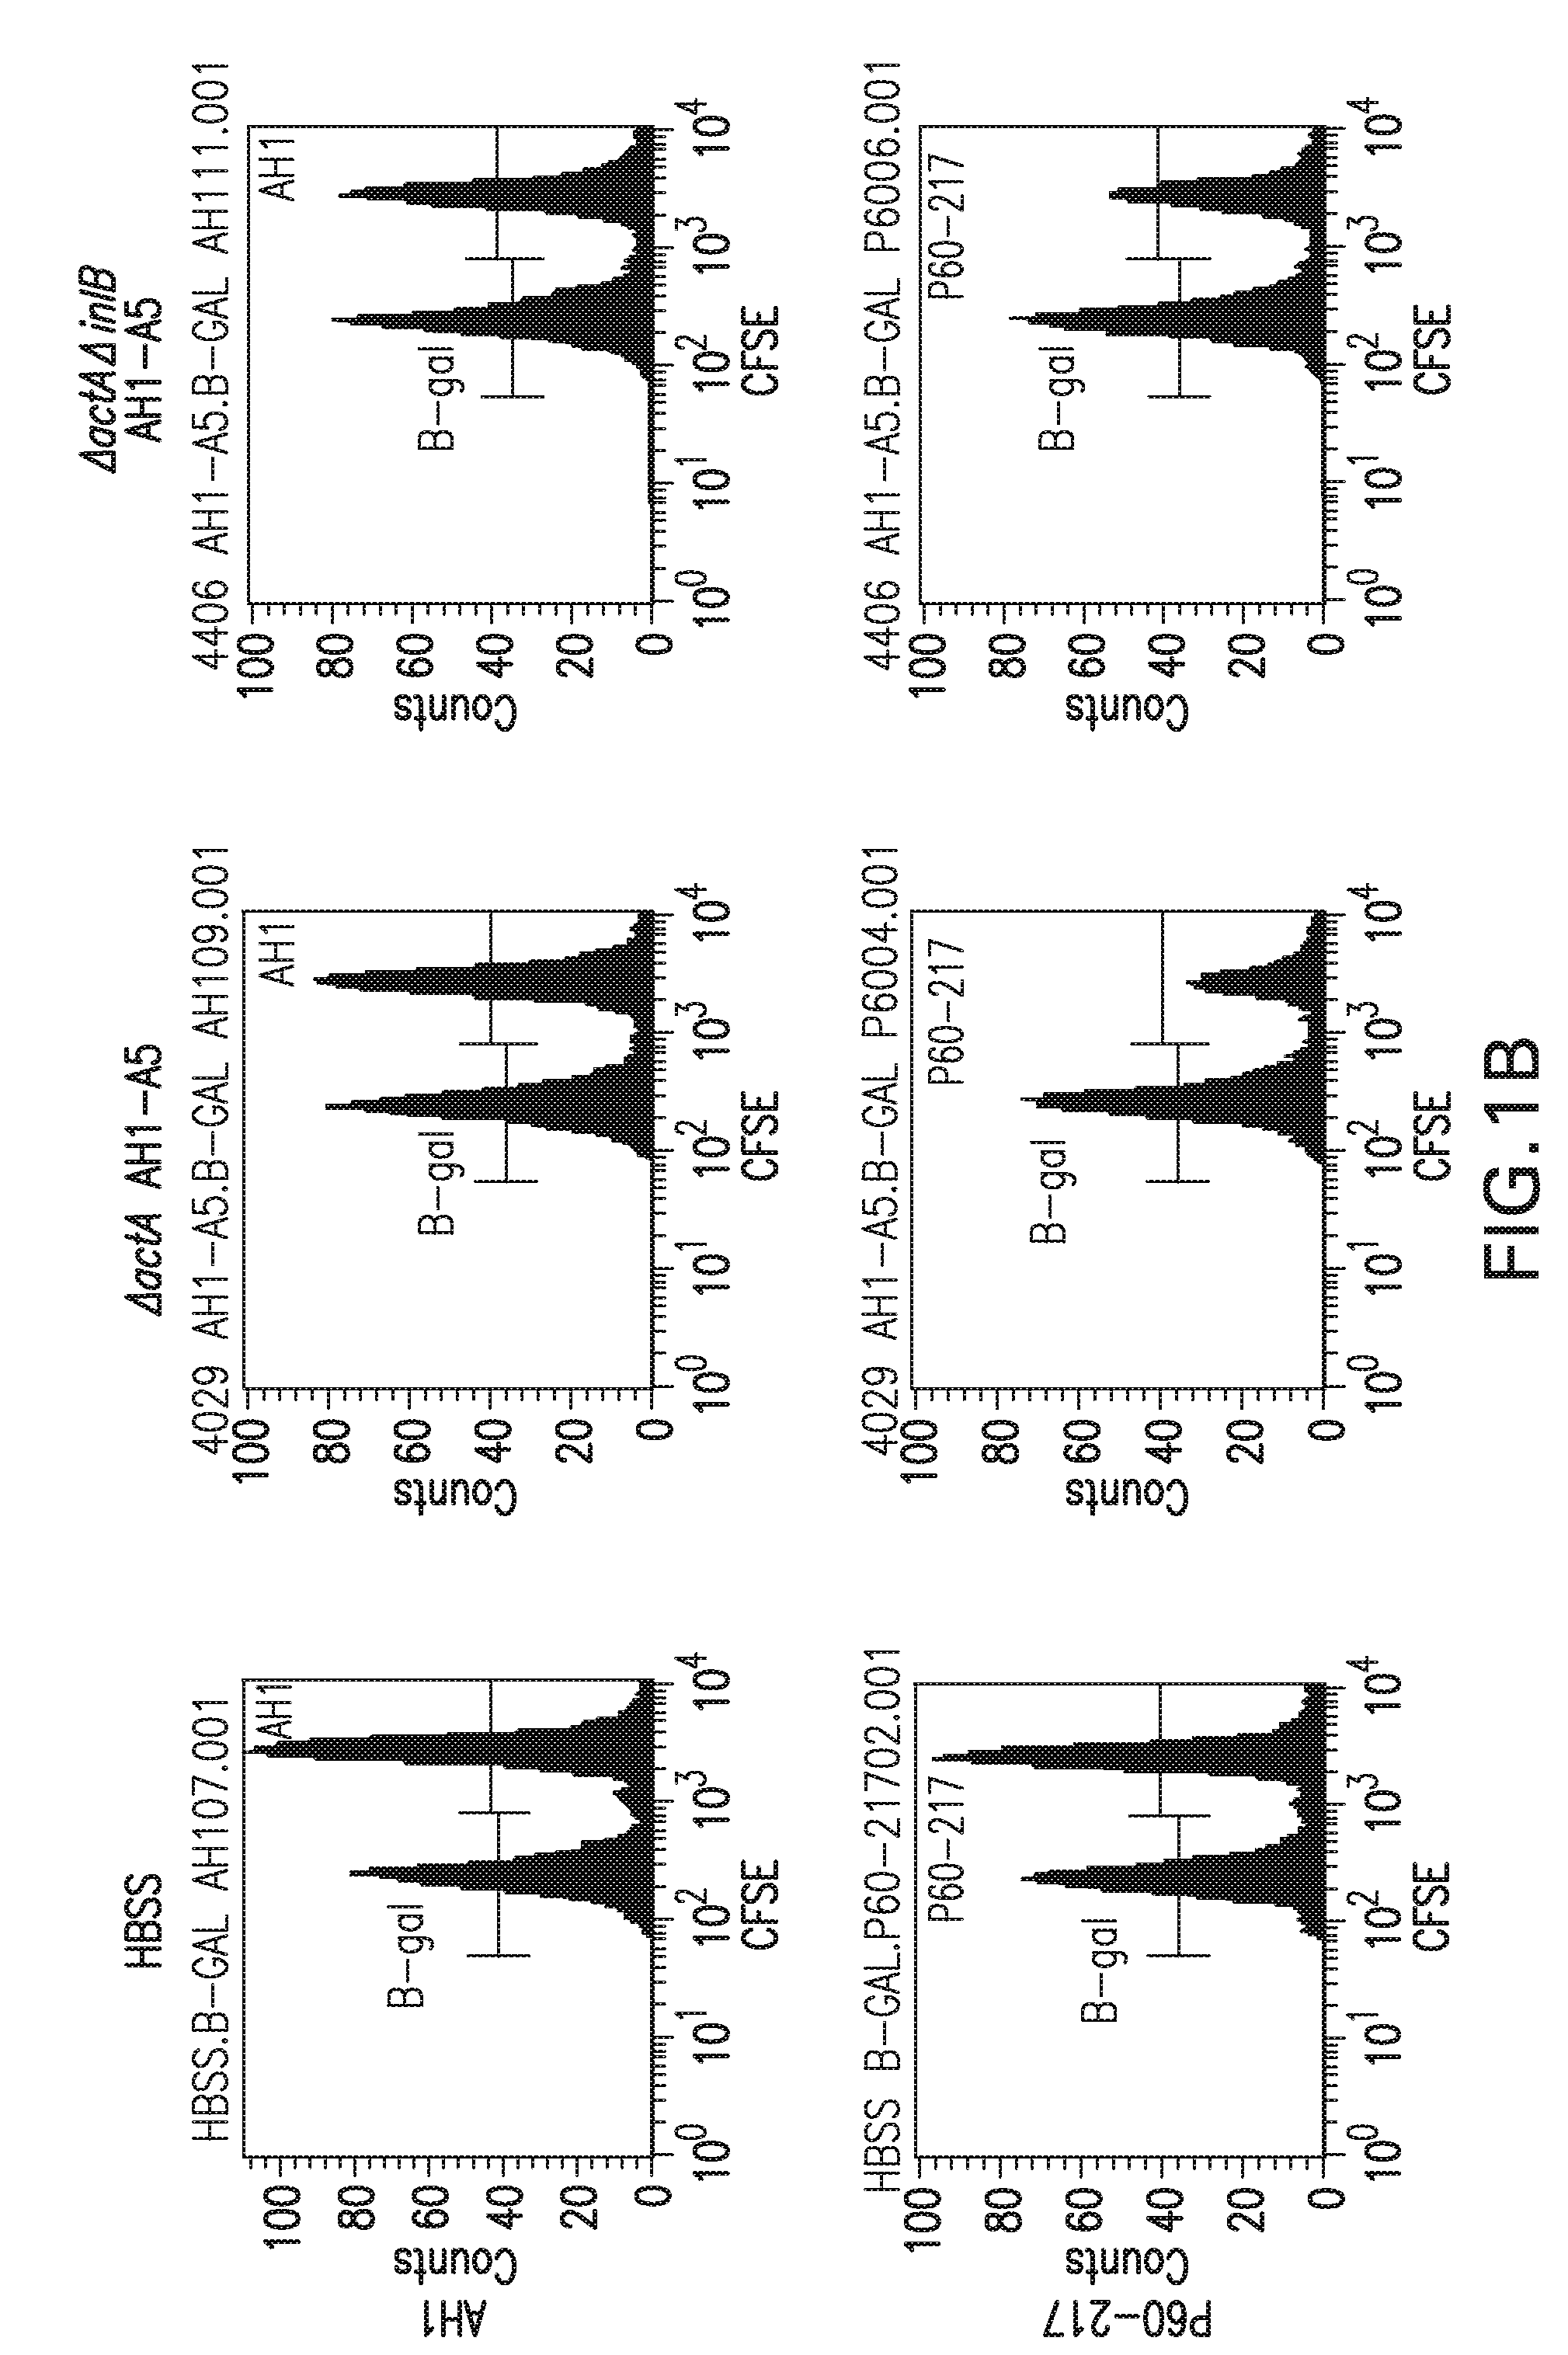 Listeria attenuated for entry into non-phagocytic cells,  vaccines comprising the listeria, and methods of use thereof